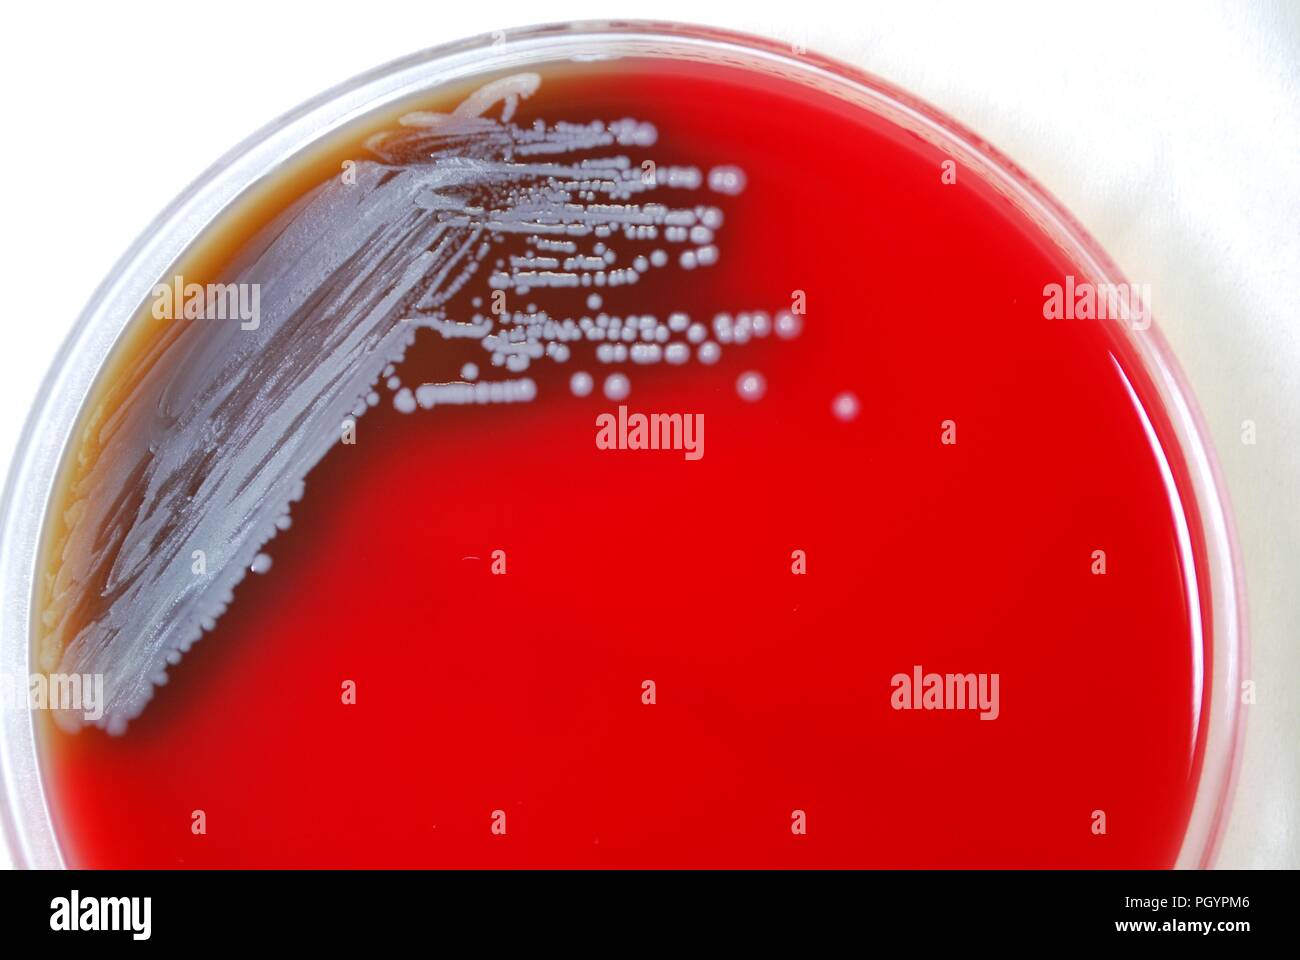 Colonial morphology of Gram-negative Burkholderia pseudomallei bacteria grown 48 hours on a medium of sheep's blood agar (SBA), 2010. Image courtesy Centers for Disease Control (CDC) / Dr Todd Parker, Audra Marsh. () Stock Photo